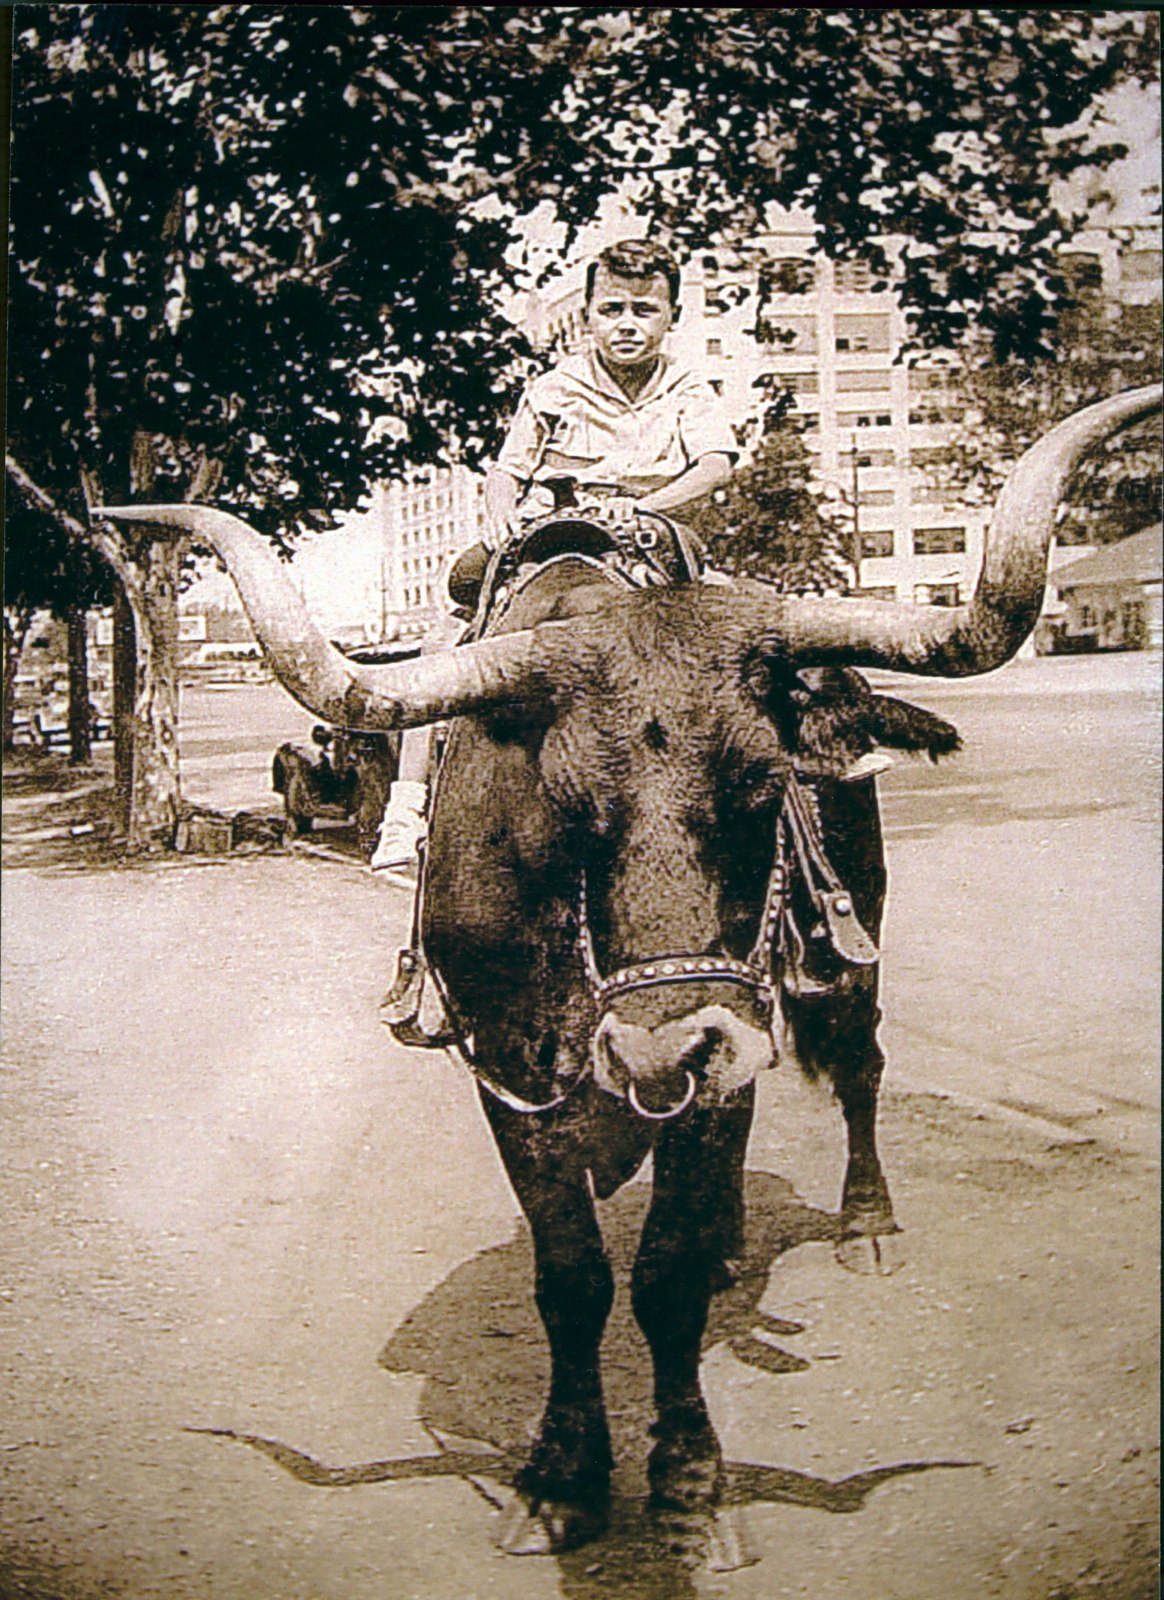 Black and white photograph of Robert Clark, age seven, on the back of a longhorn steer at the Frontier Centennial Exposition, Fort Worth, Texas, 1936